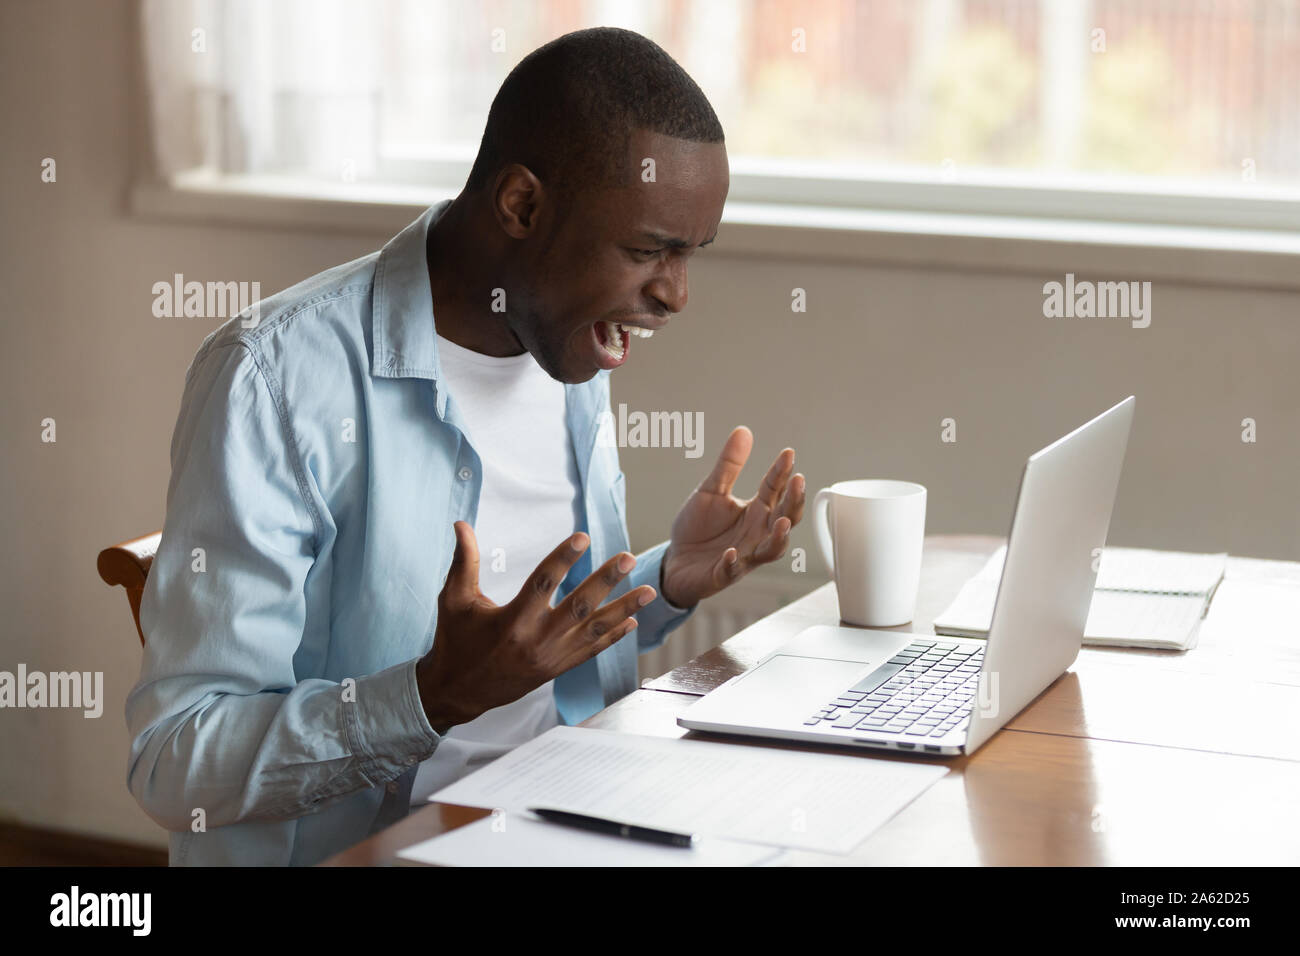 Stressed millennial african ethnic guy irritated by broken computer. Stock Photo